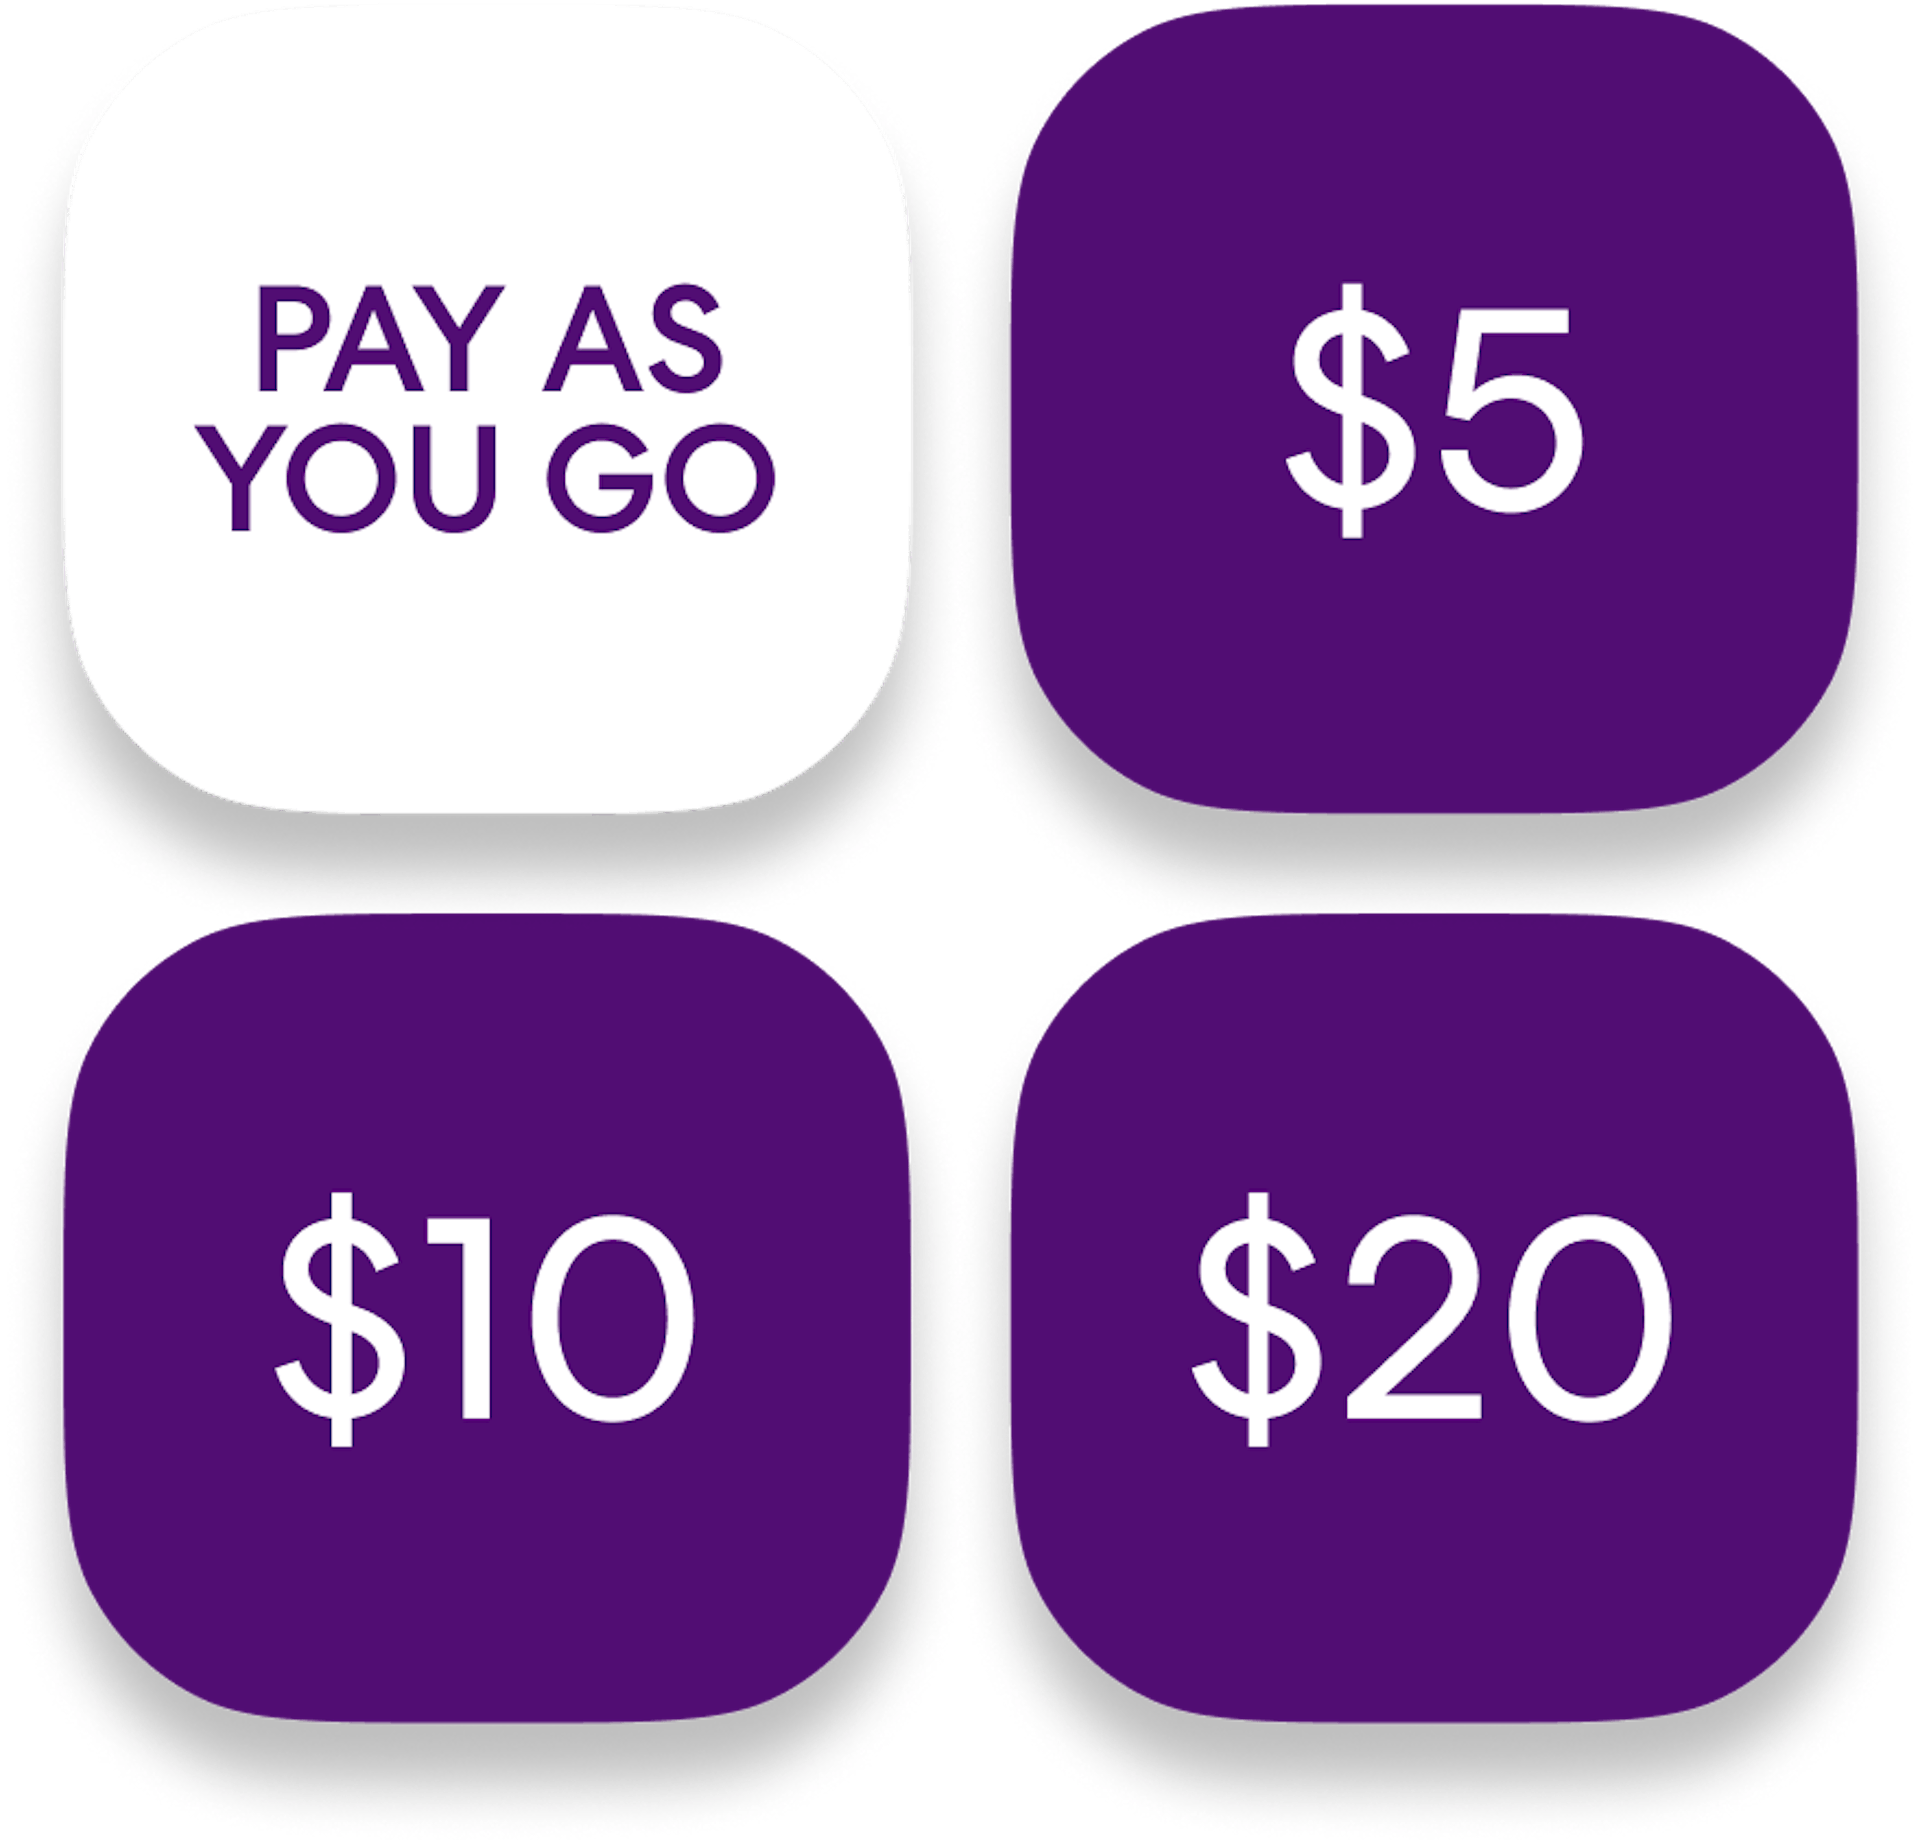 A quad showing four tiles. Reading clockwise from top-left: pay as you go, $5, $10, $20.